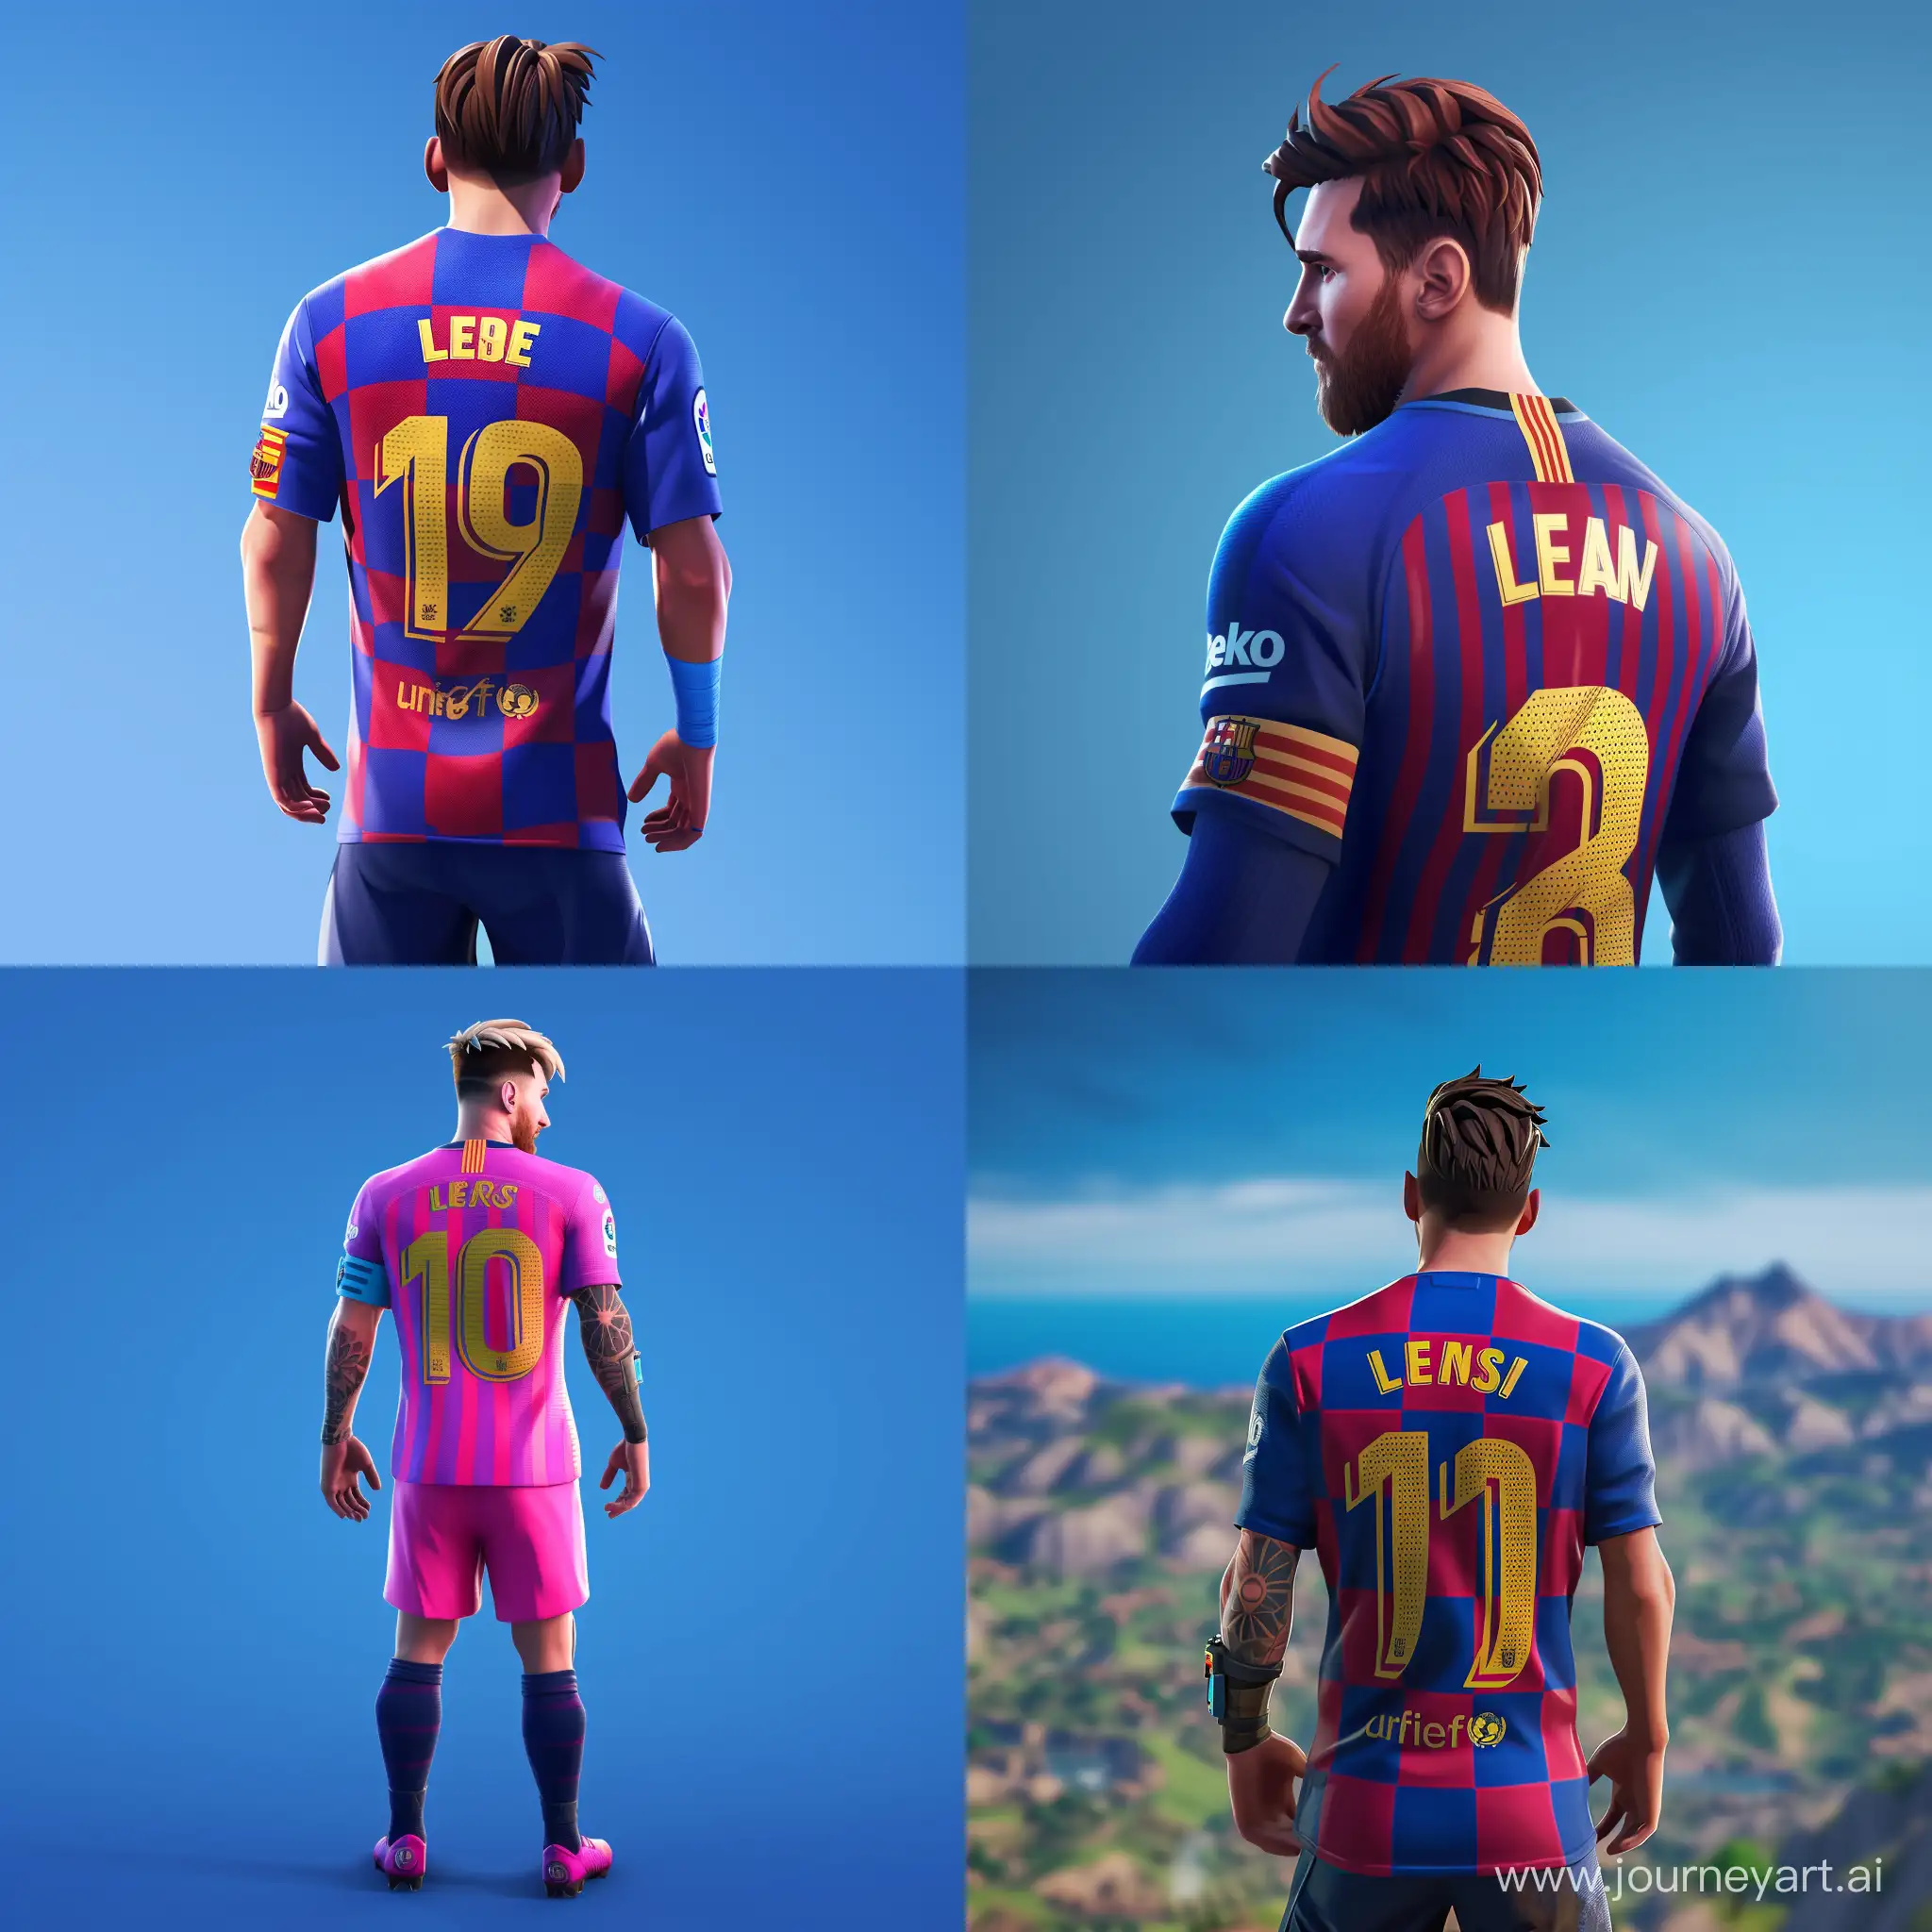 Leo Messi fortnite style, from behind looking backwards